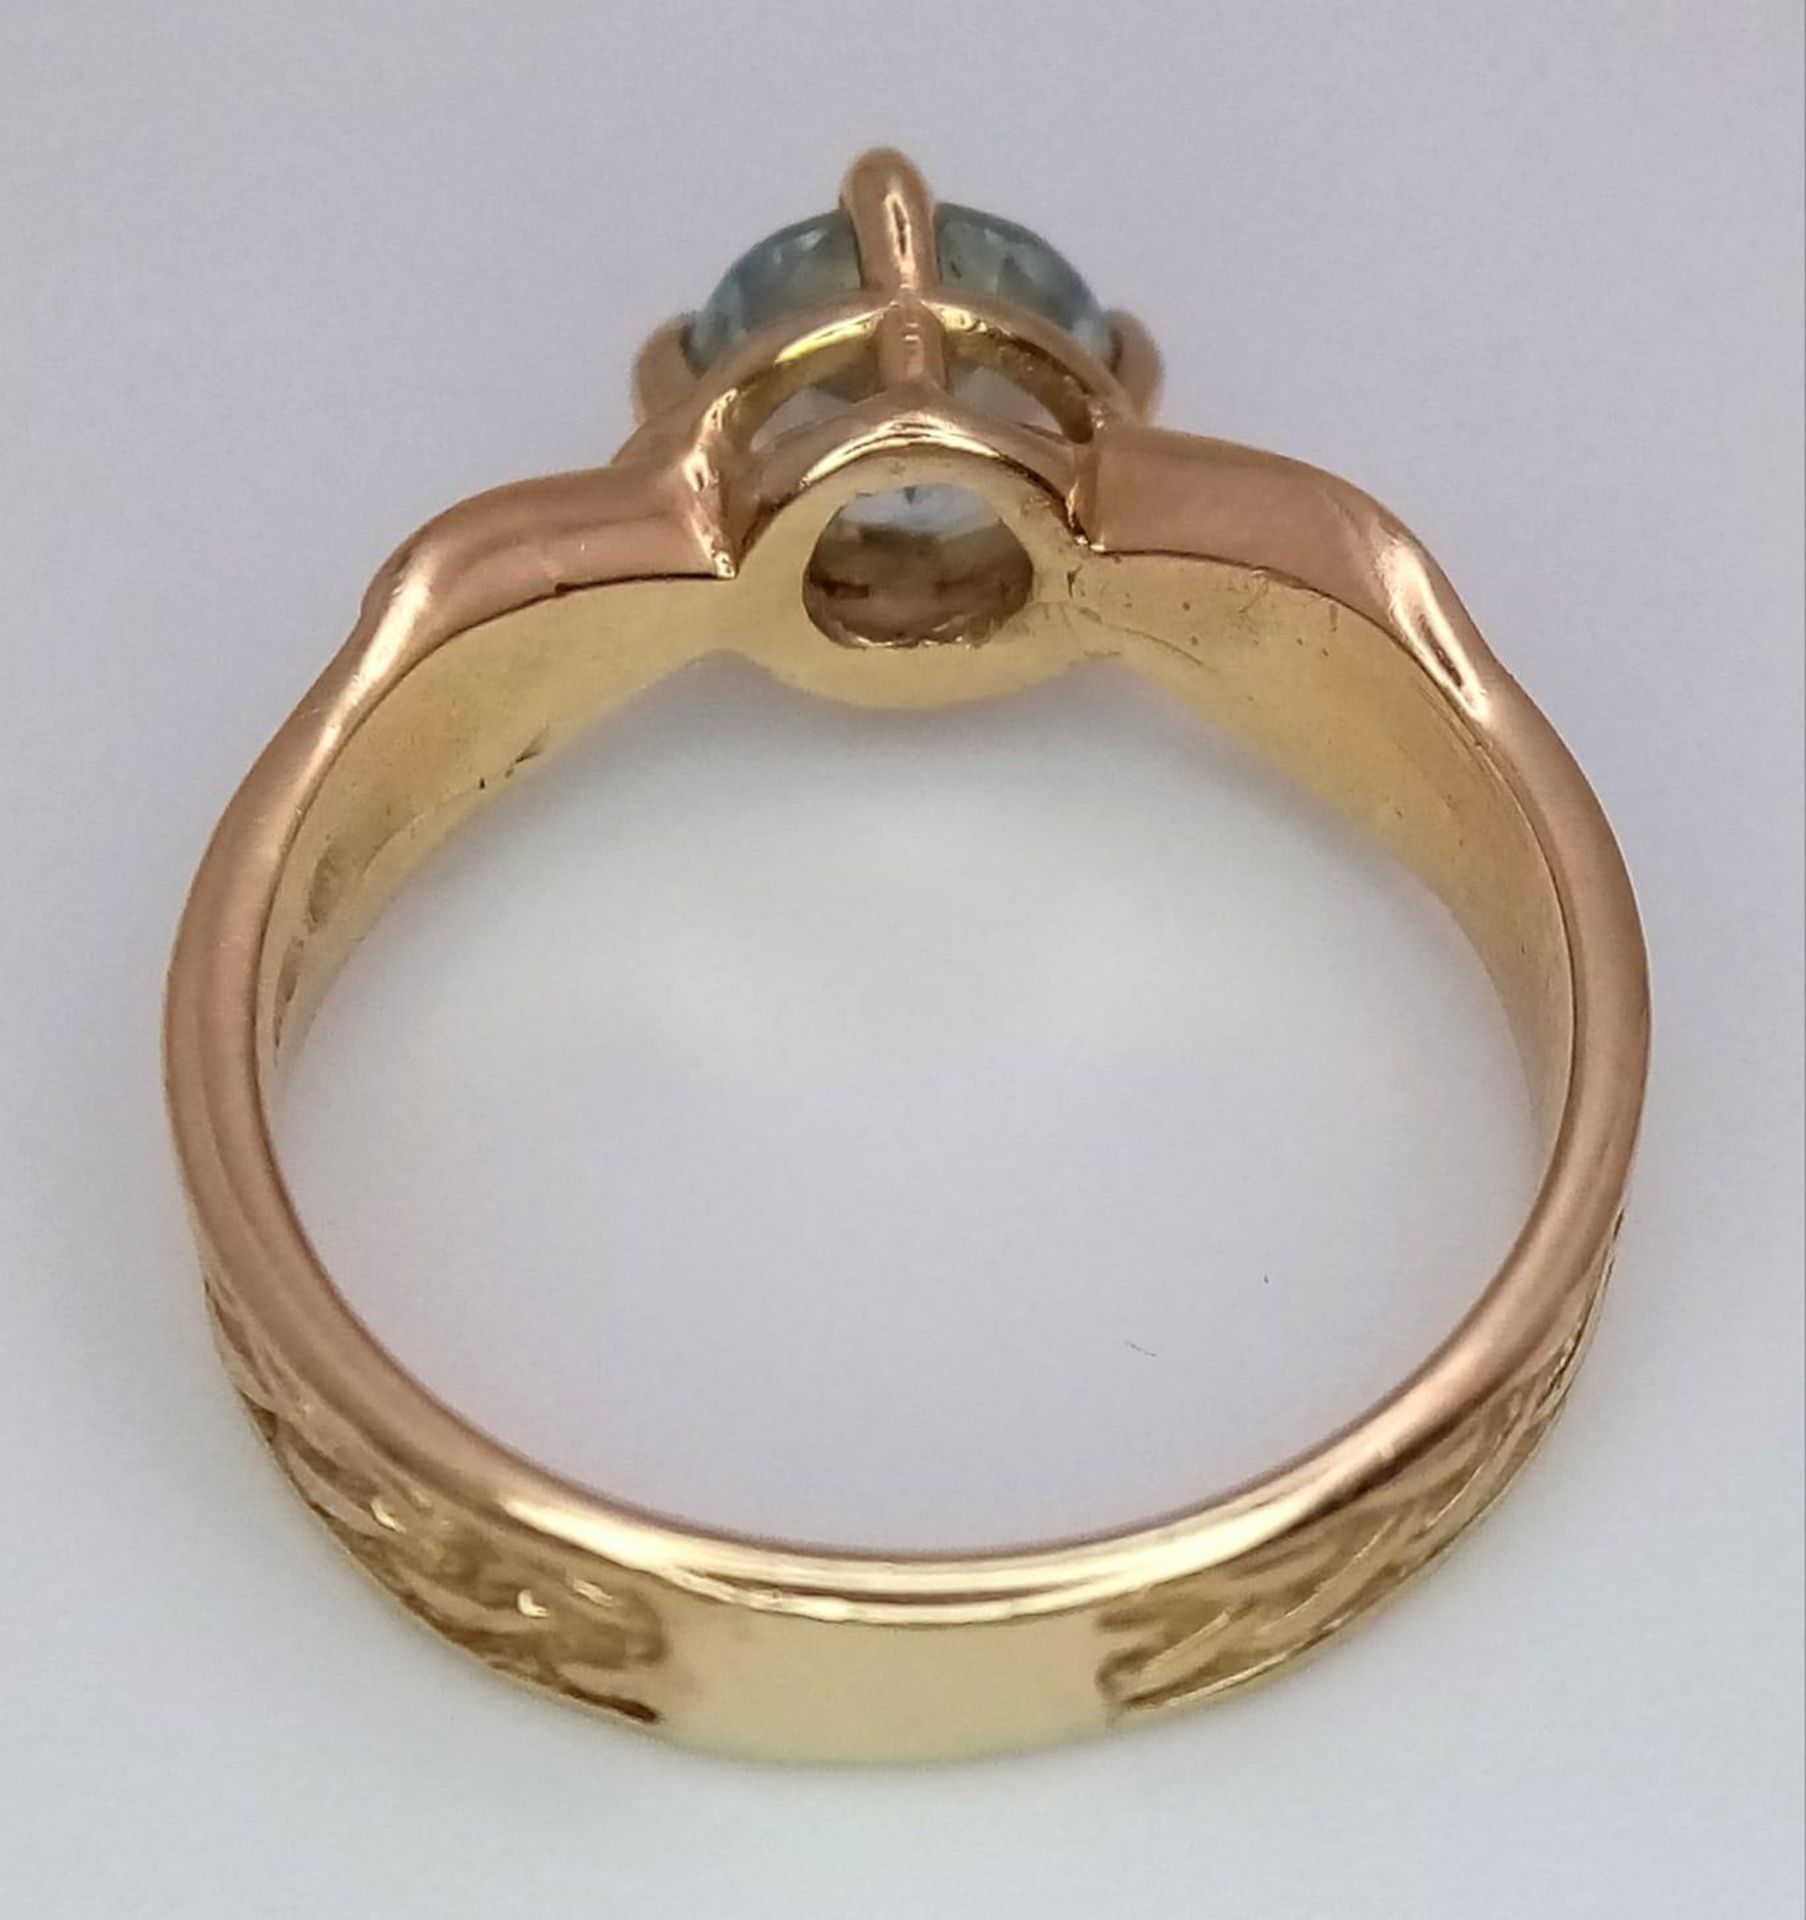 A Vintage 14K Yellow Gold Aquamarine Ring. Size K 1/2. 3.6g total weight. - Image 4 of 5